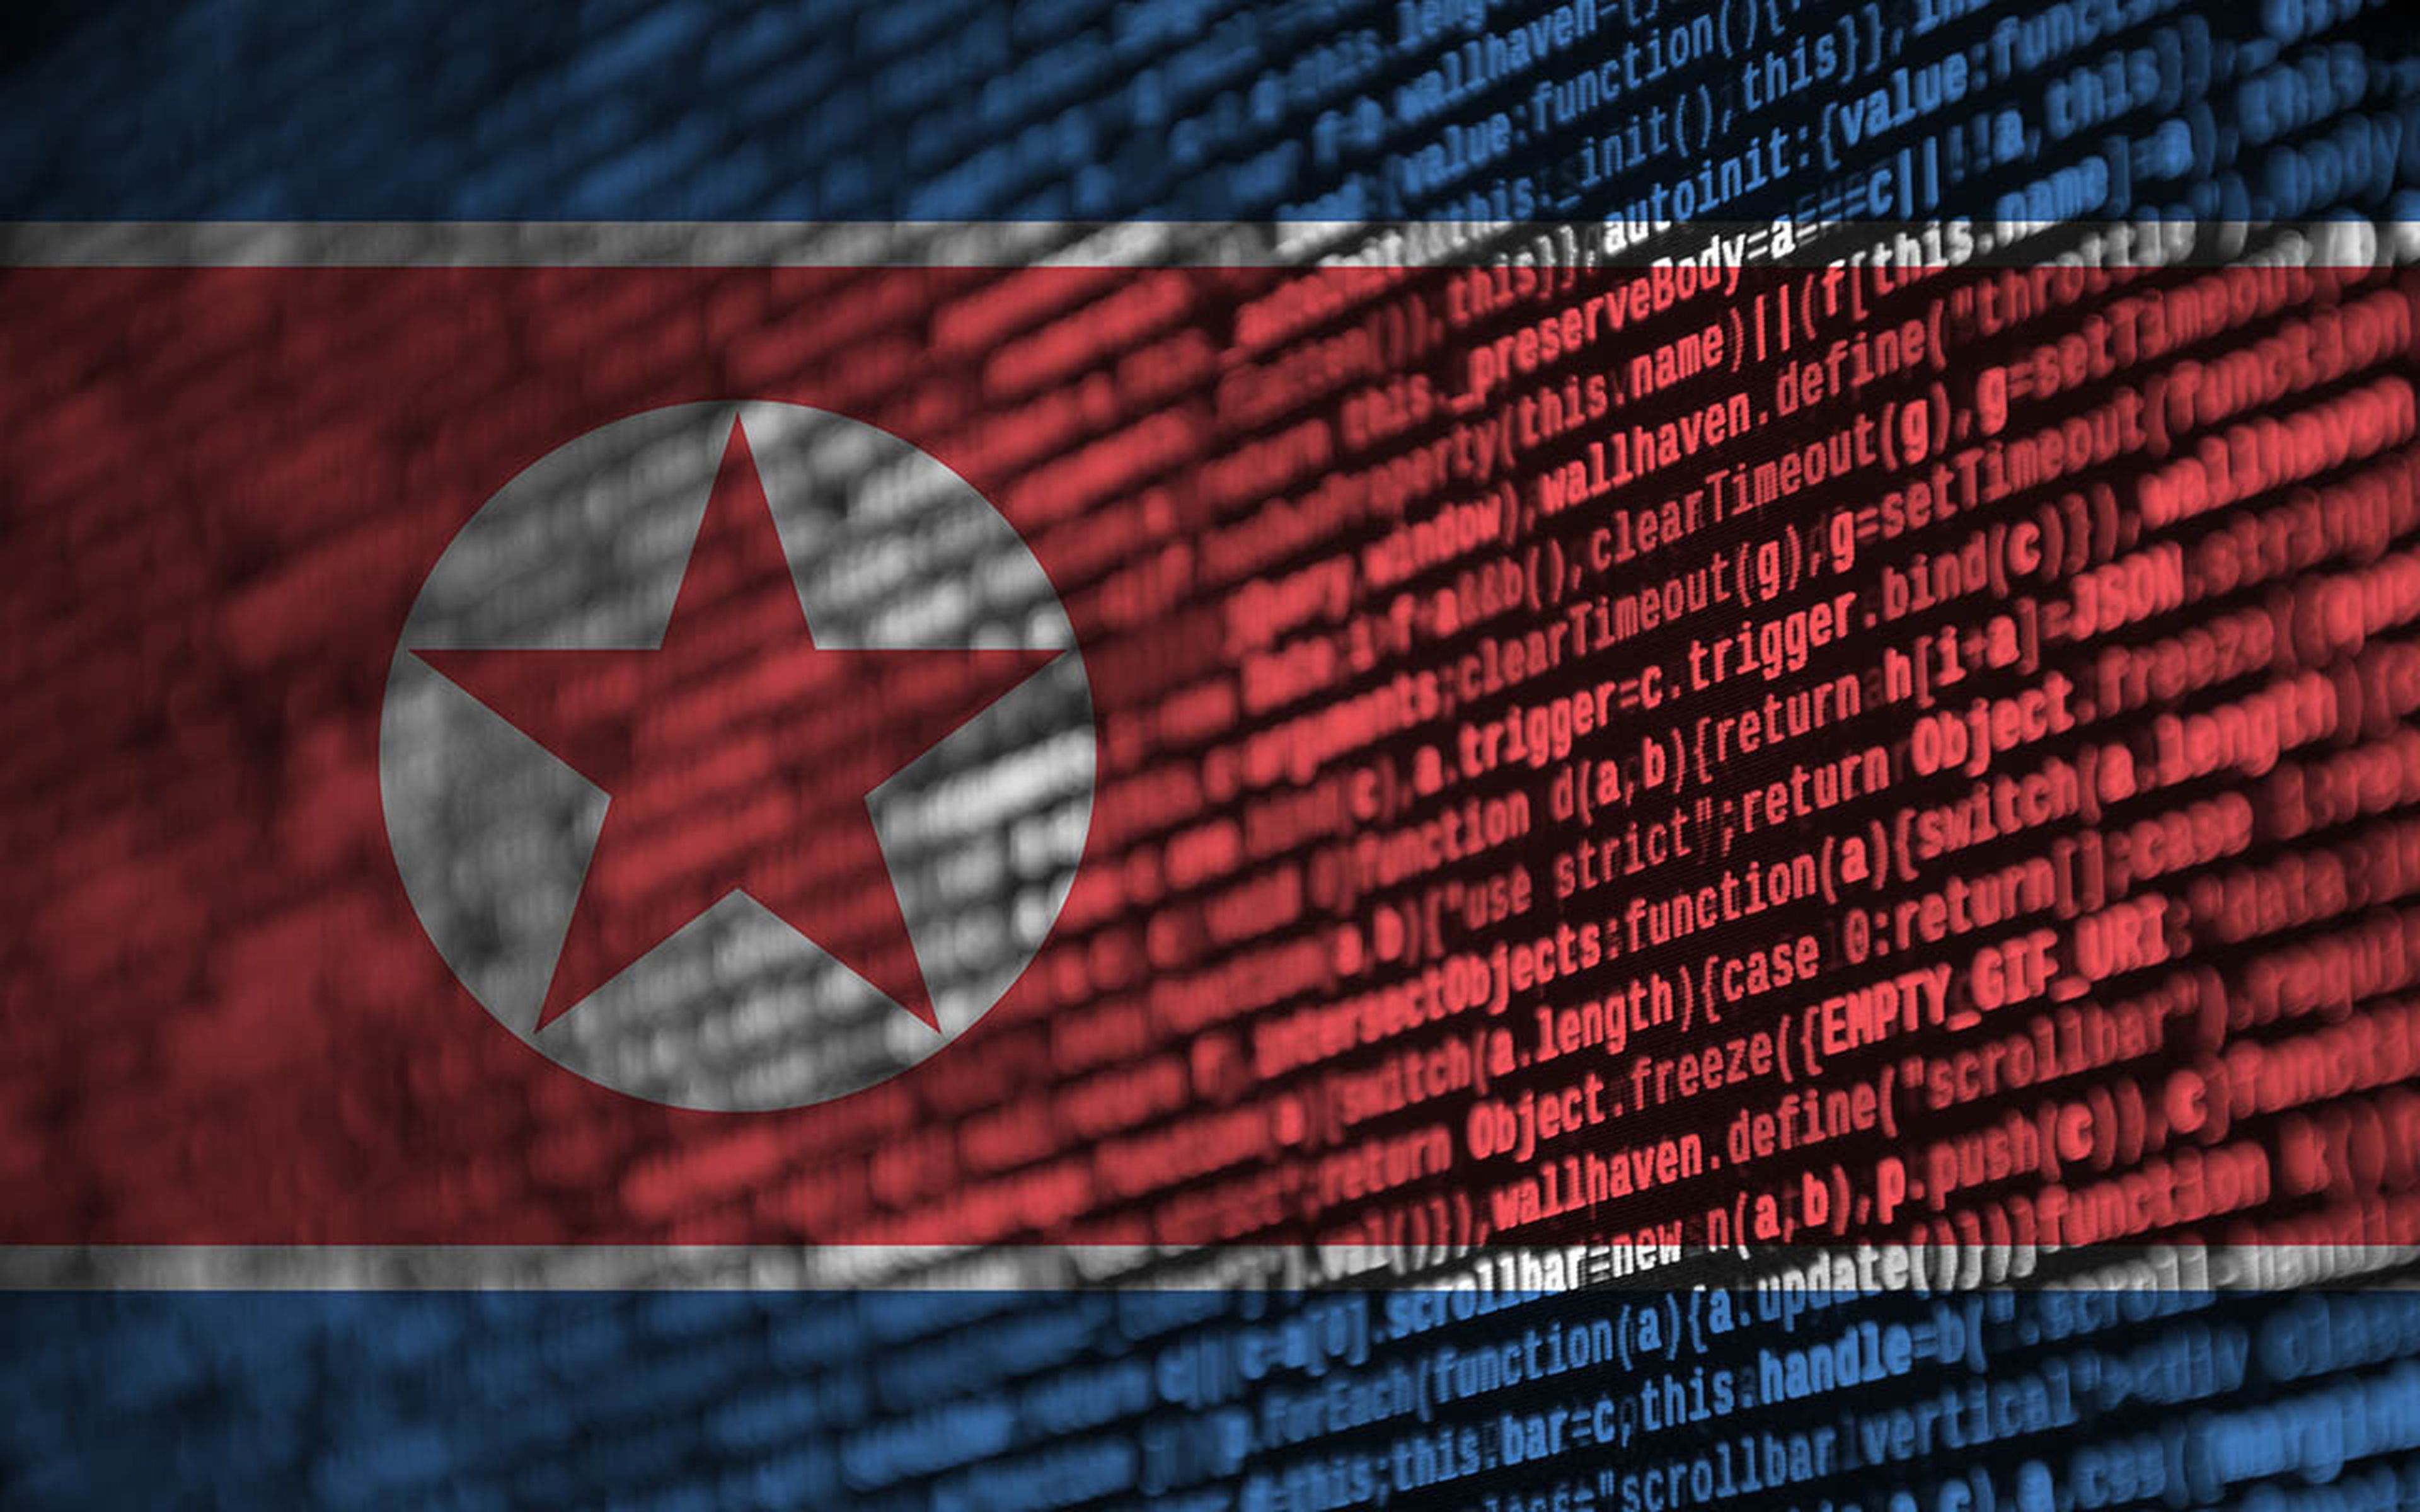 North Korea flag is depicted on the screen with the program code.